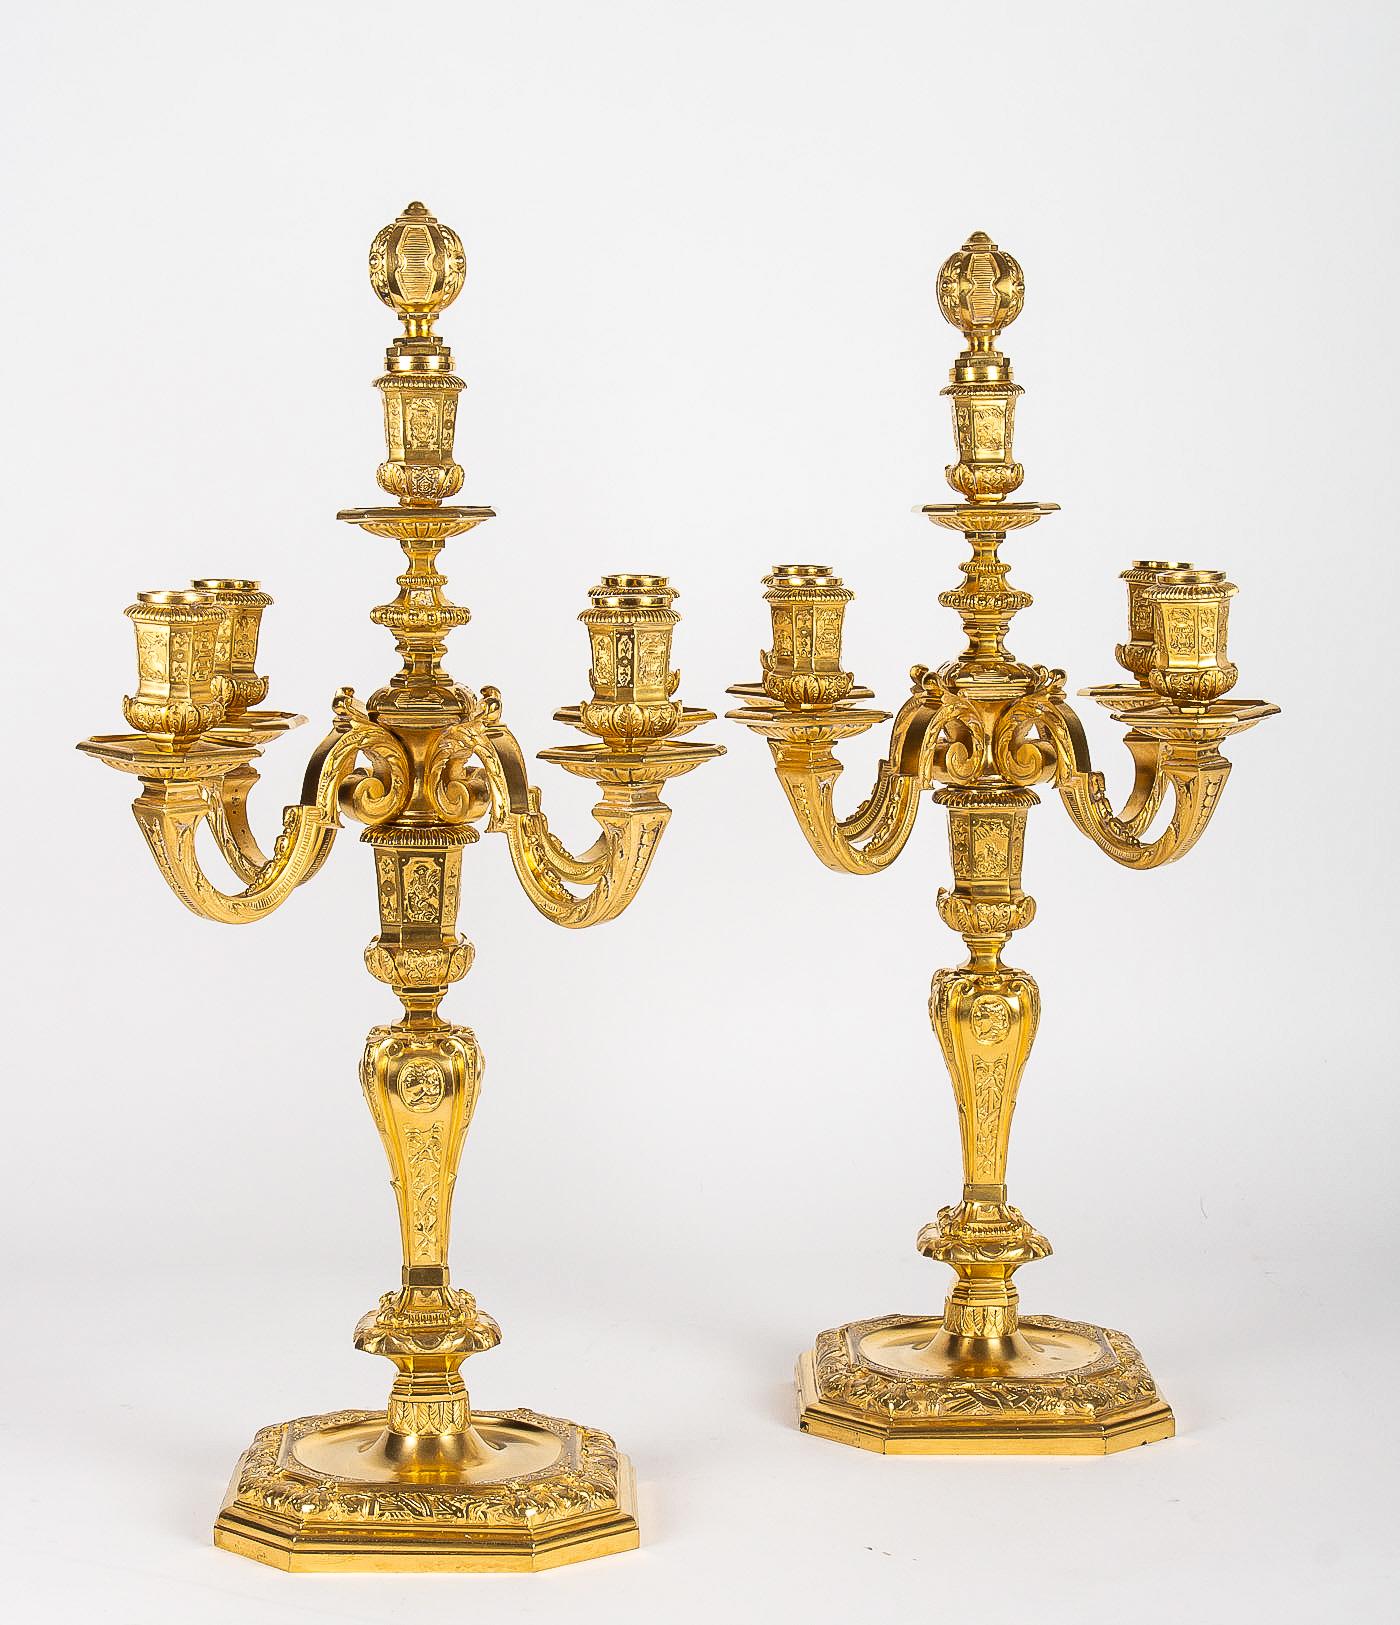 19th Century by H Voisenet, Large Pair of Louis XIV Style Ormolu Candelabras, circa 1880-1900